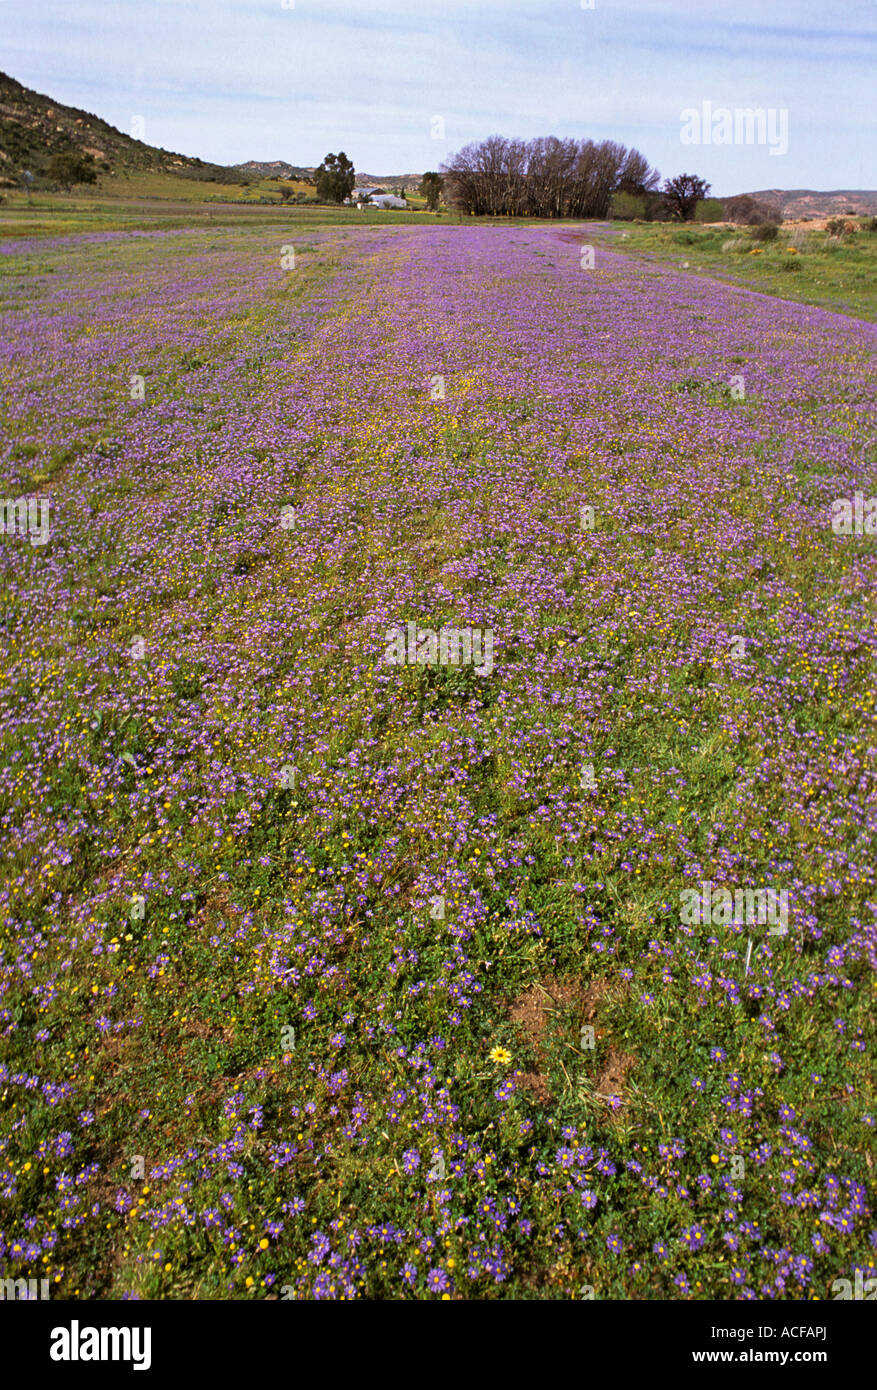 Field of Felicia daisies with farmhouse in background, near Kamieskroon Namaqualand, north-western Cape; South Africa Stock Photo